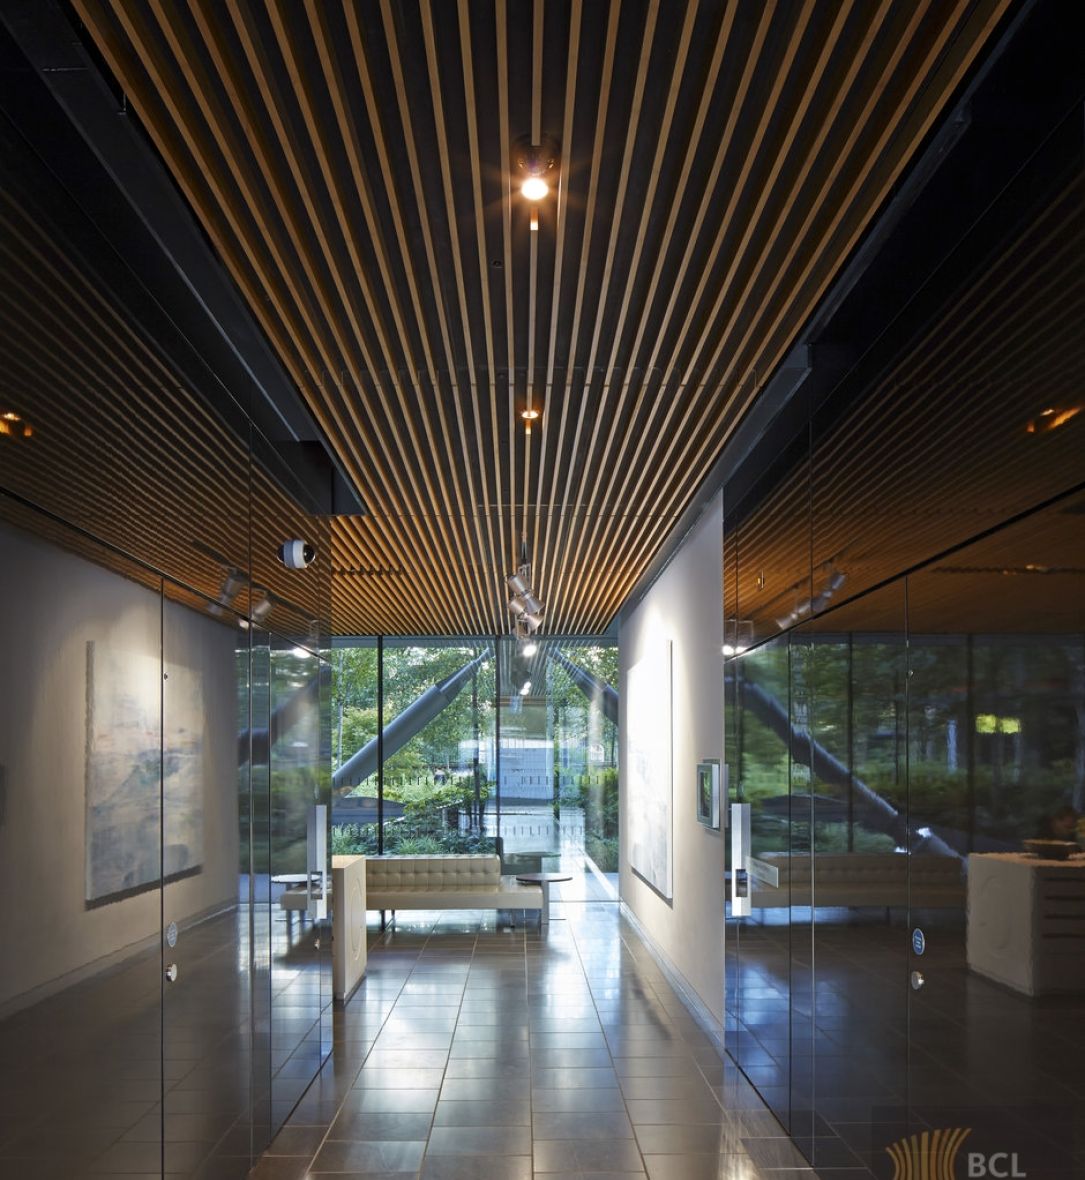 BCL wooden slatted ceilings at NEO Bankside in London